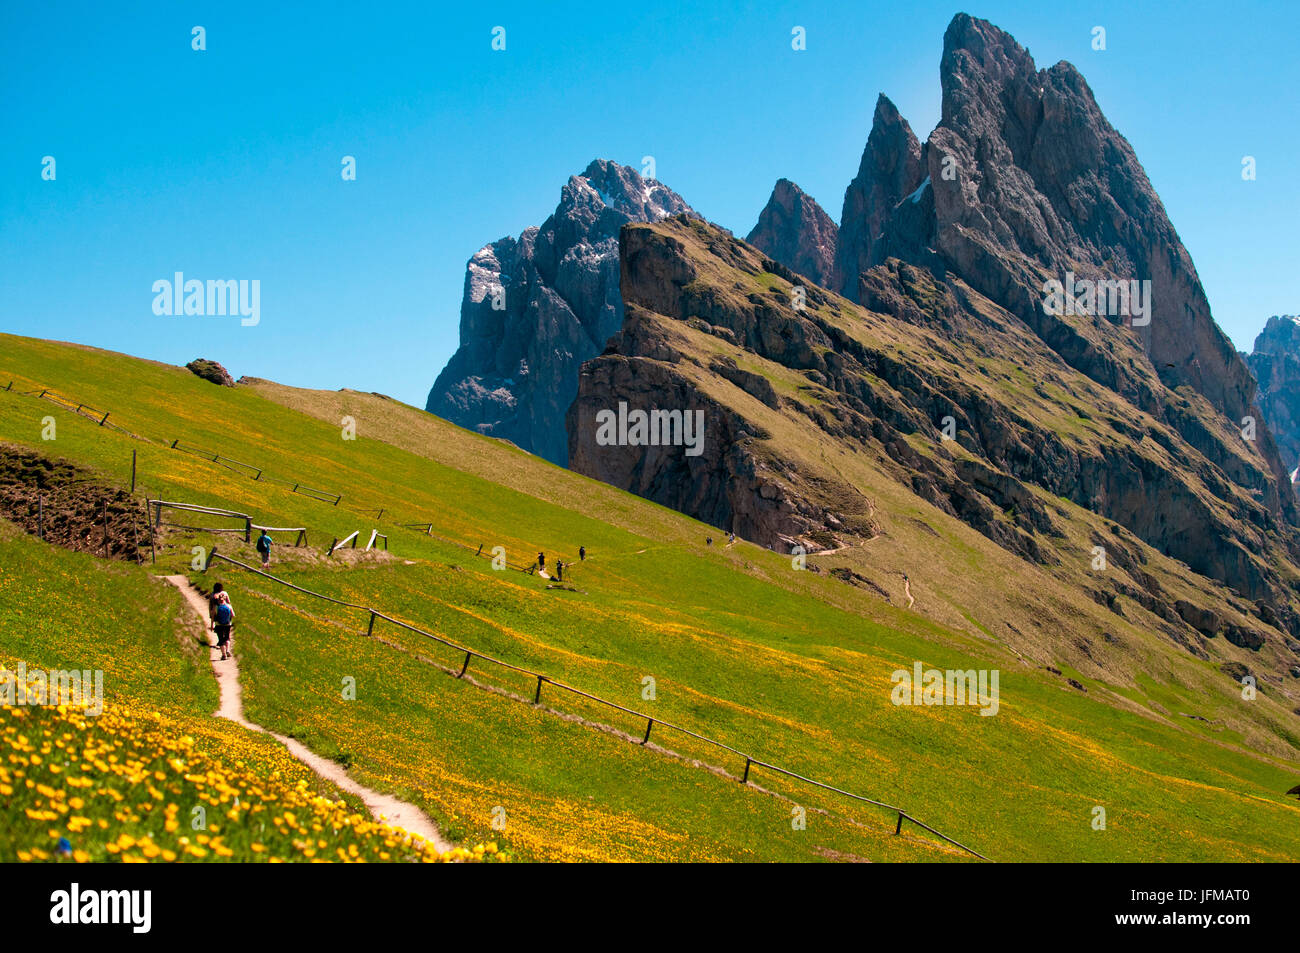 Trekking trail on the Seceda mountains with great views of the rocky peaks,  Dolomiti, Trentino Alto Adige, Italy Stock Photo - Alamy